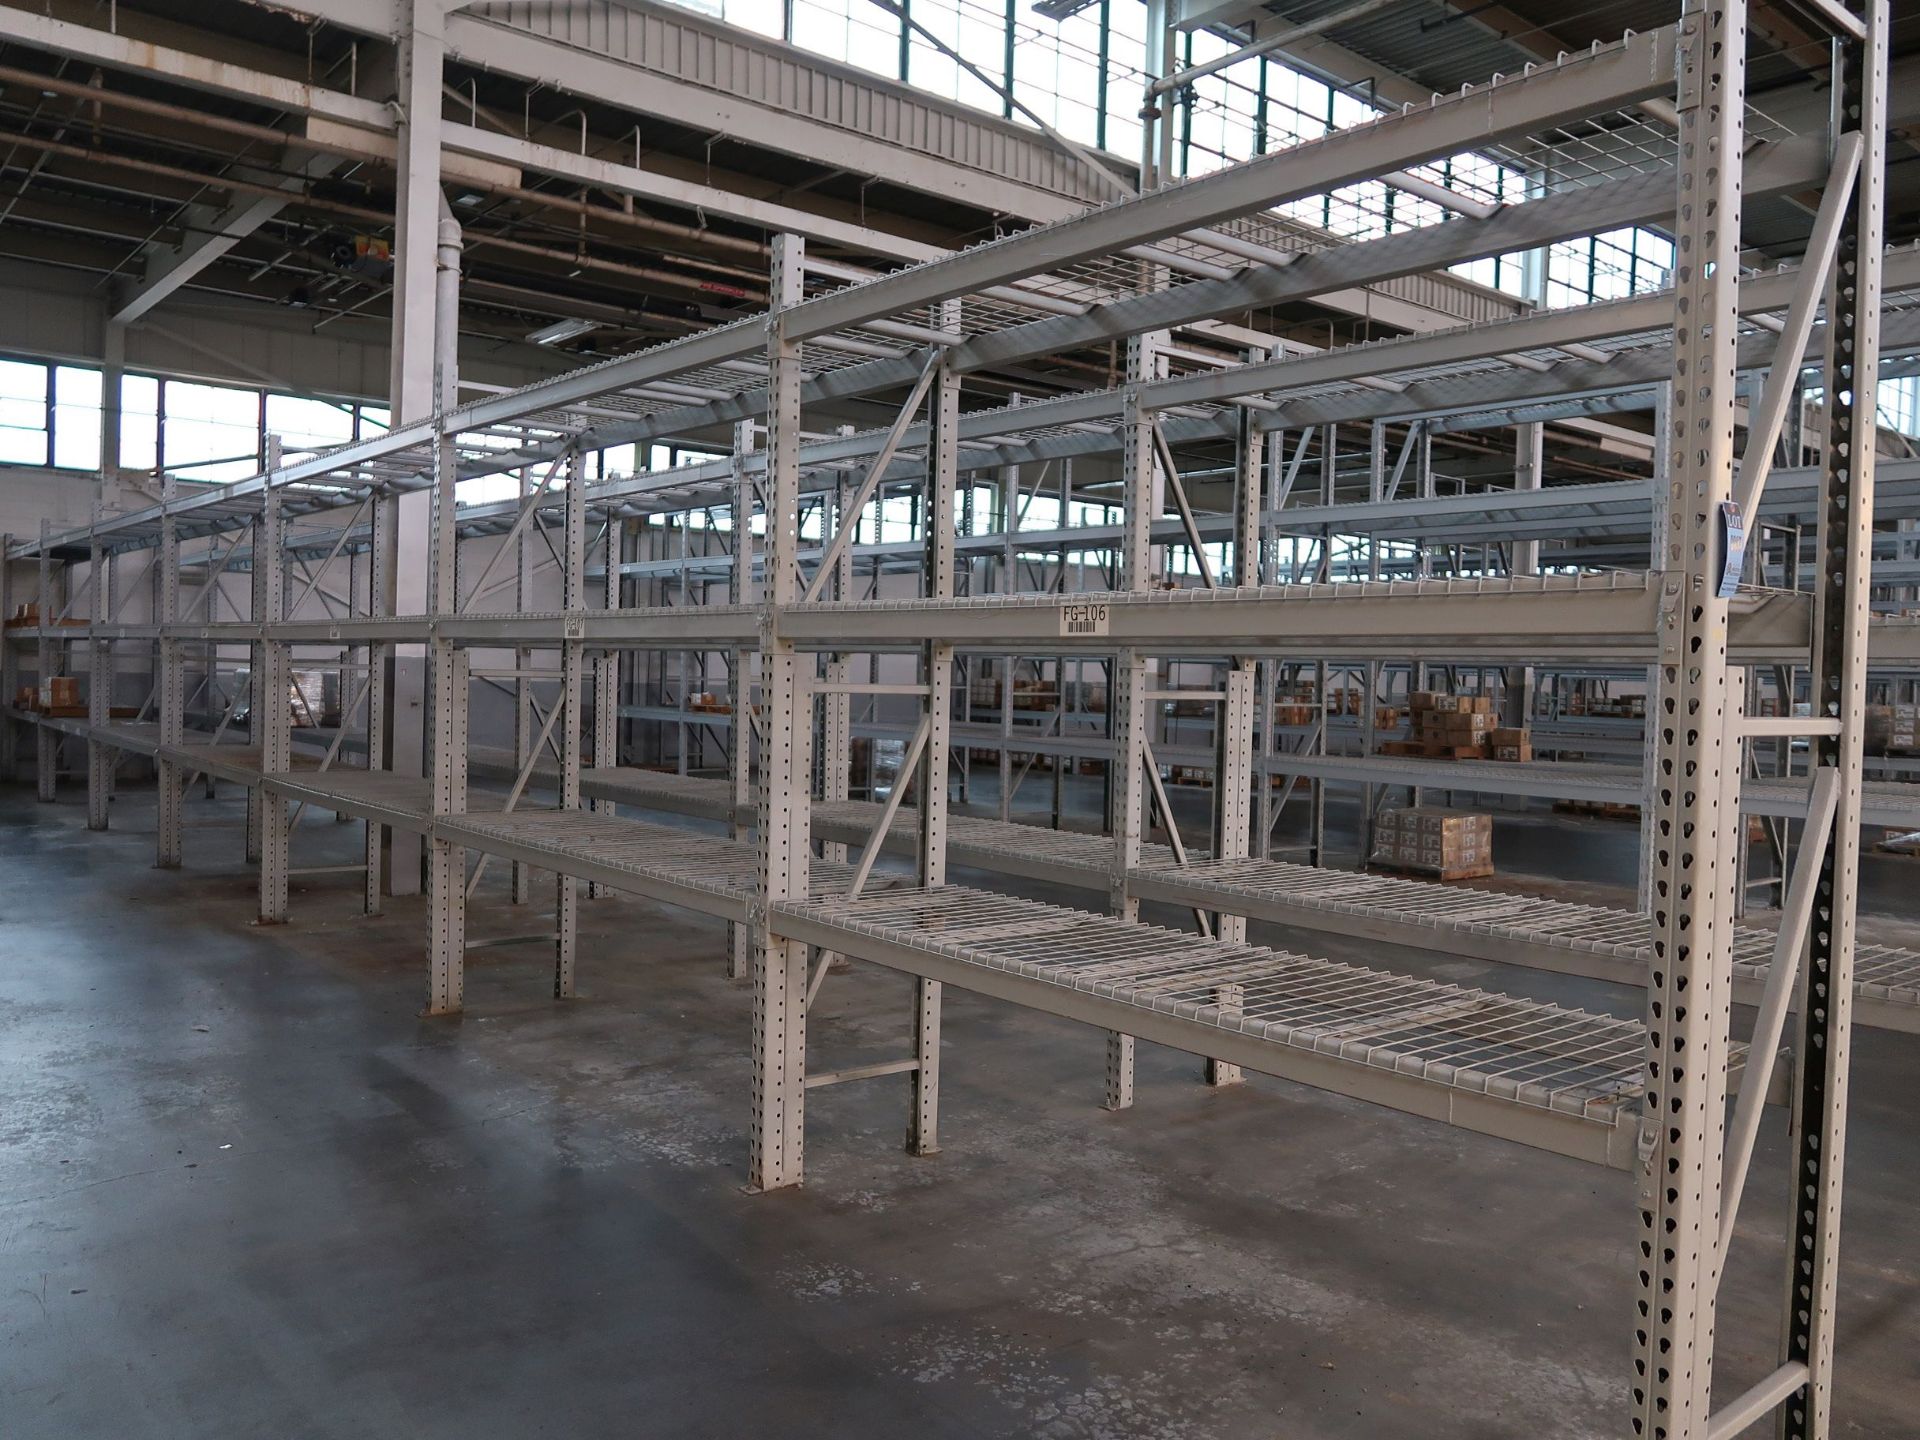 SECTIONS 28" X 180" X 117" TEARDROP ADJUSTABLE BEAM PALLET RACKS WITH (8) 28" X 117" UPRIGHTS, (